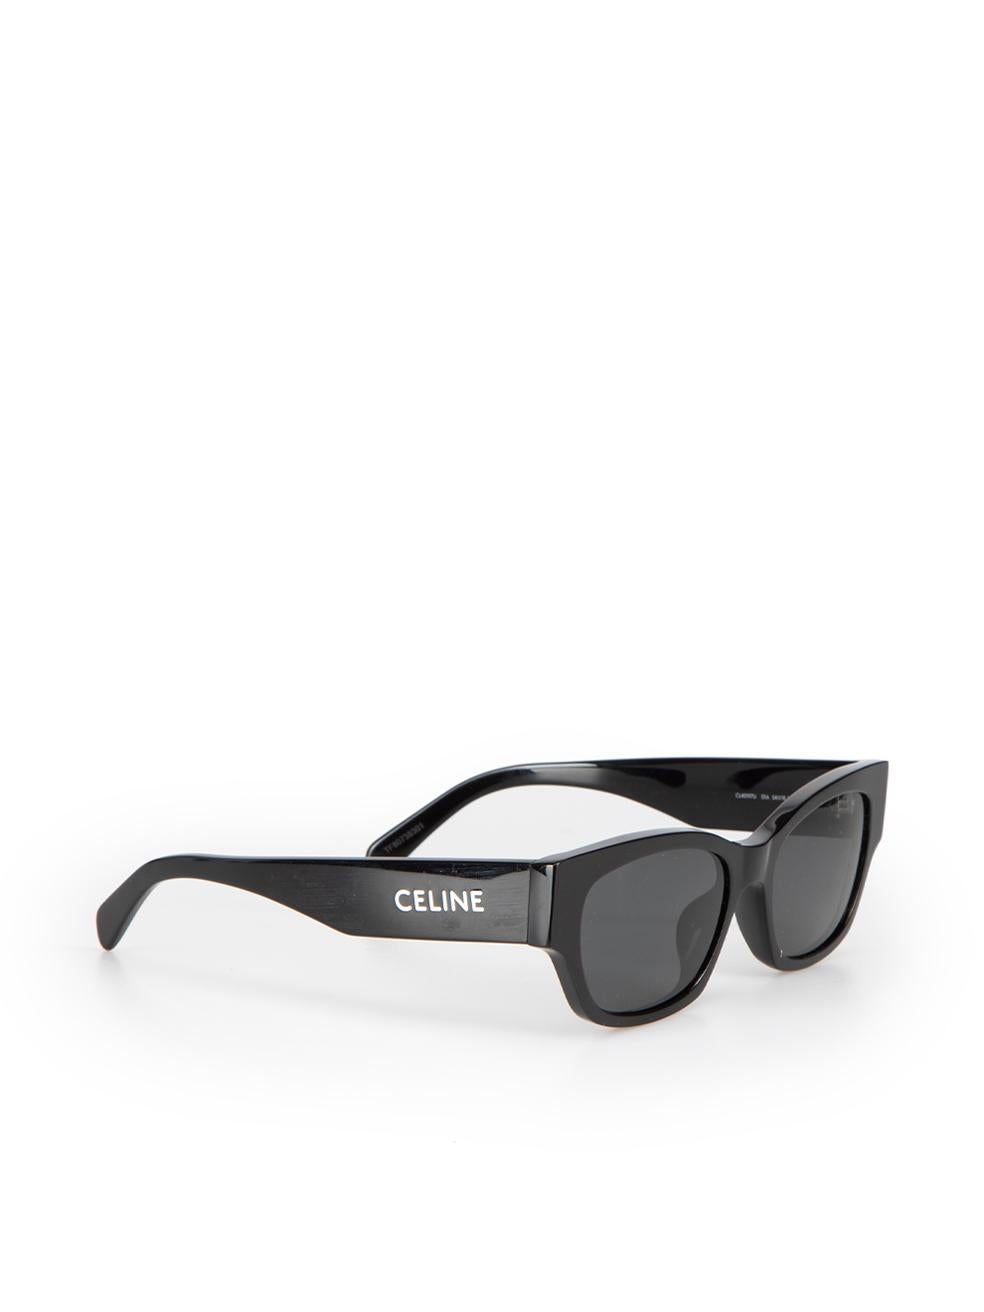 CONDITION is Very good. Minimal wear to sunglasses is evident. Minimal wear to the left-arm and left lens with tiny scratches on this used Céline designer resale item.



Details


Black

Acetate

Cat eye sunglasses

Logo on the arms

Black